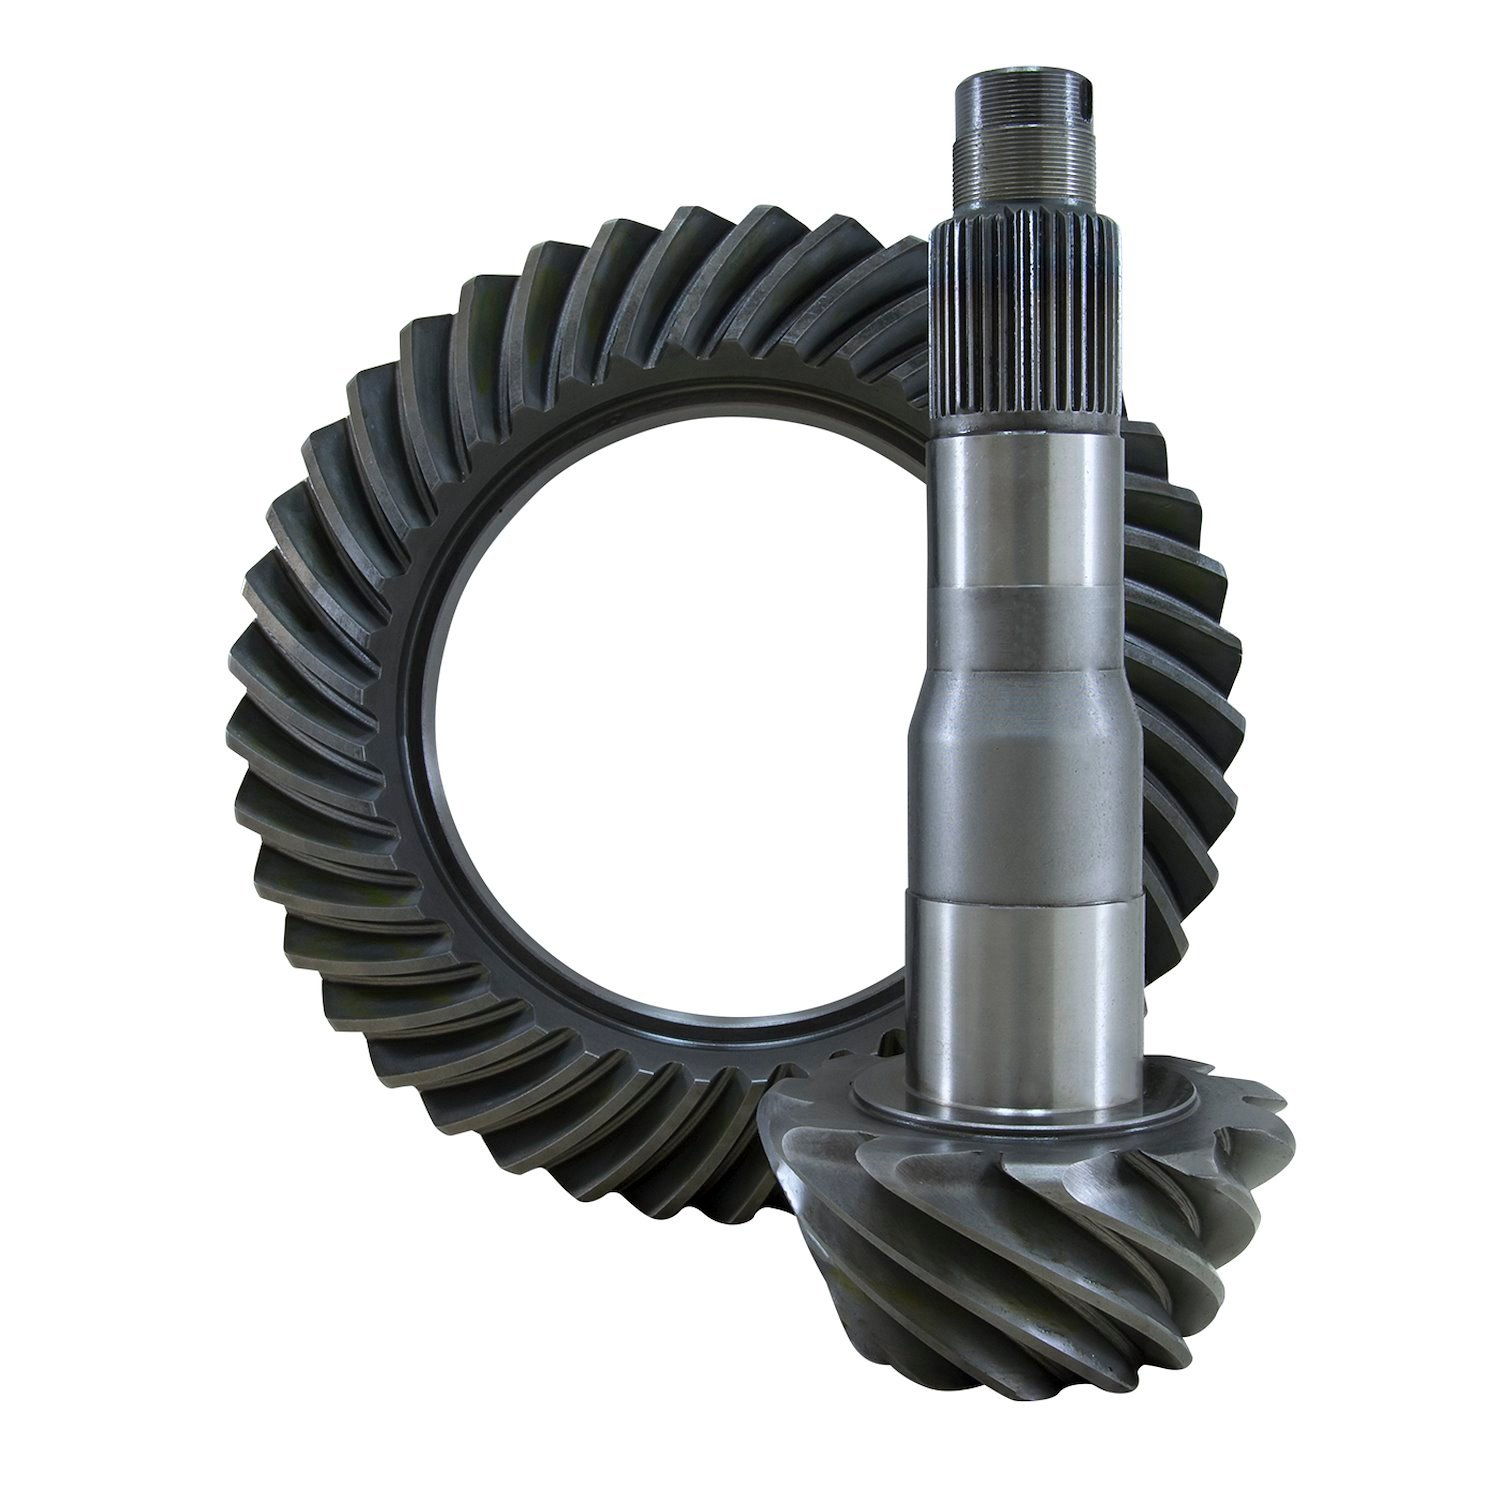 USA Standard 36418 Ring & Pinion Gear Set, For '11 & Up Ford 10.5 in., 3.55 Ratio.